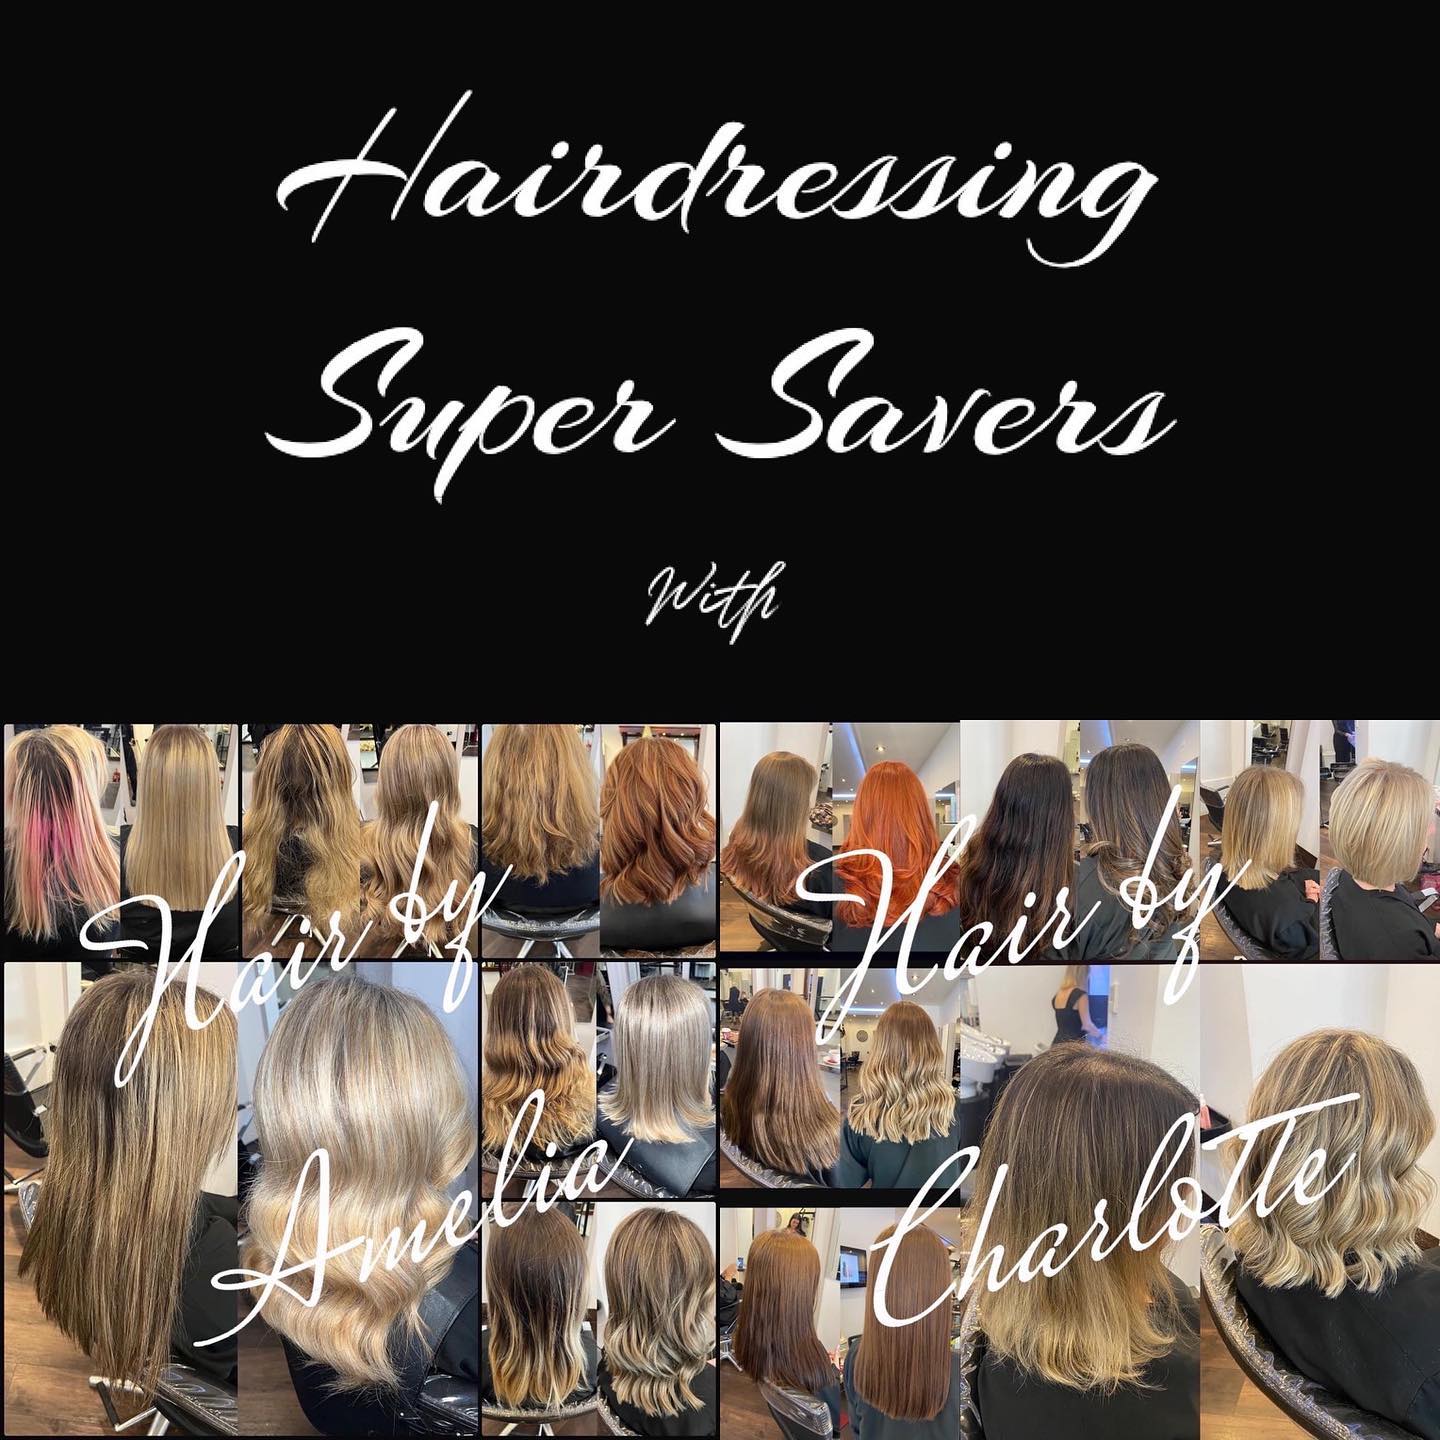 Hairdressing Super Savers Offers, Top Sutton Coldfield Salon